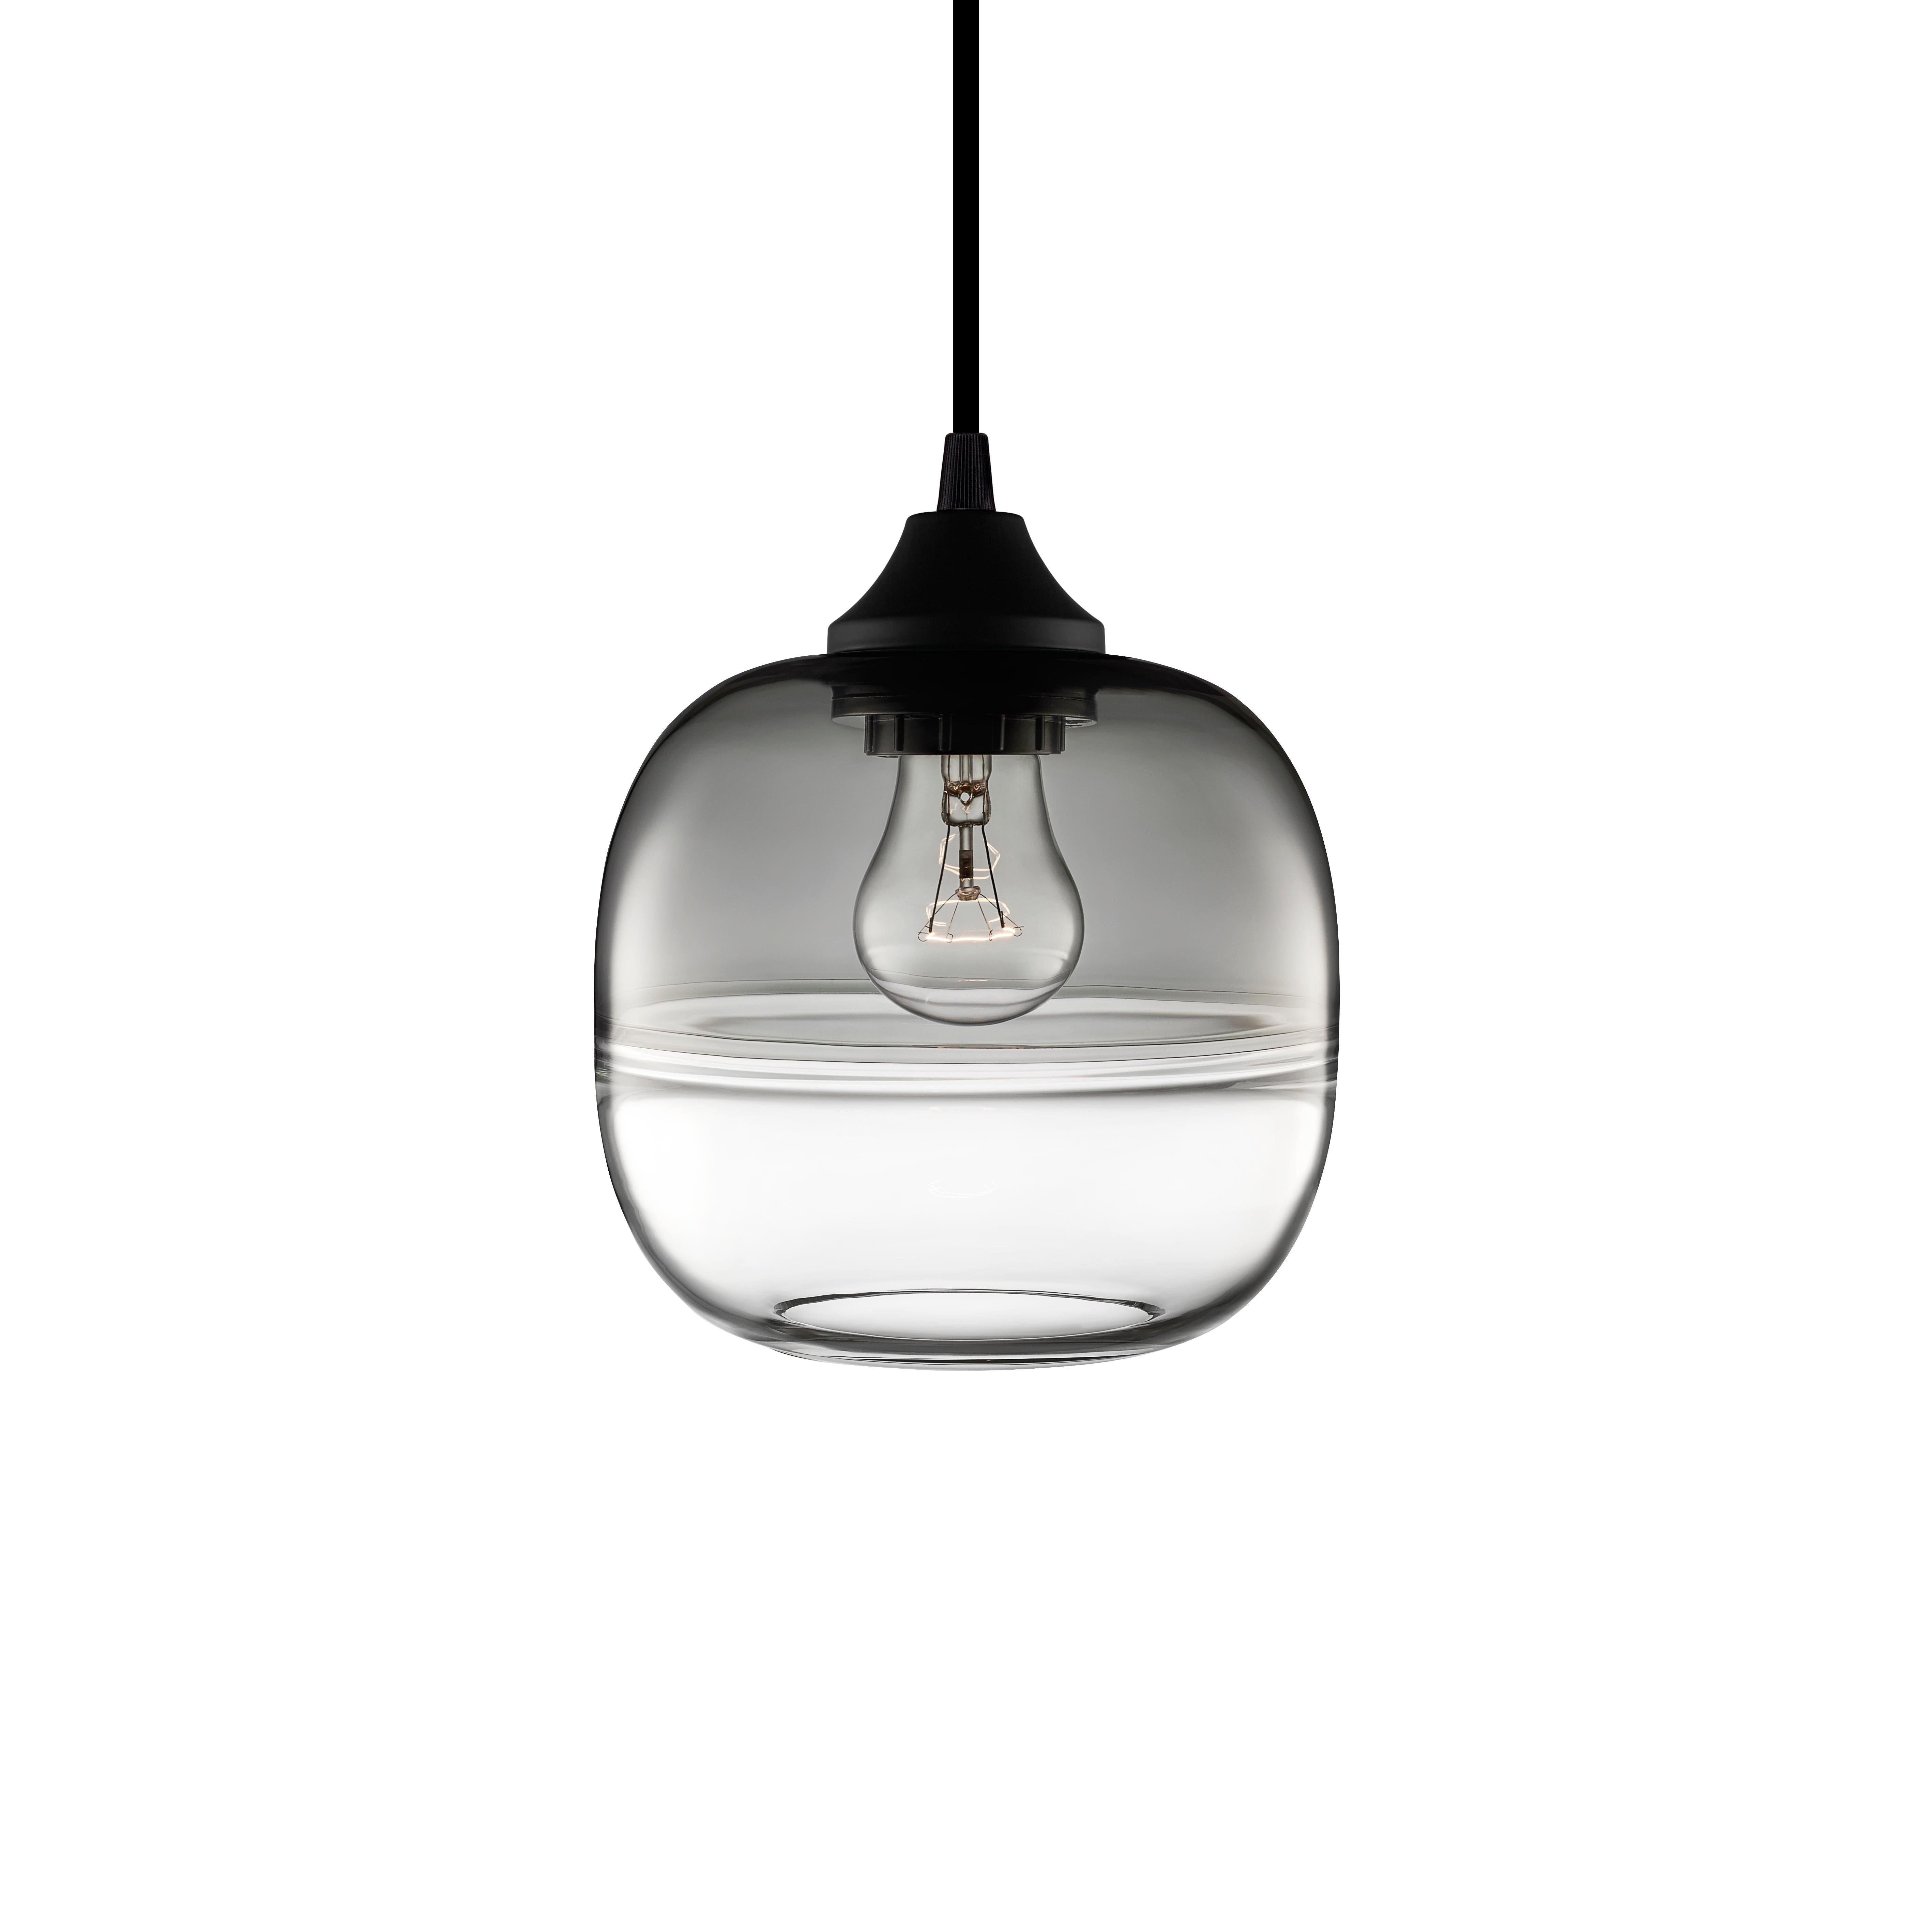 Created by implementing the Venetian technique of fusing two separate entities of glass into one single piece, the Encalmo Grand and Petite celebrates inspired, sensual design. Every single glass pendant light that comes from Niche is handblown by